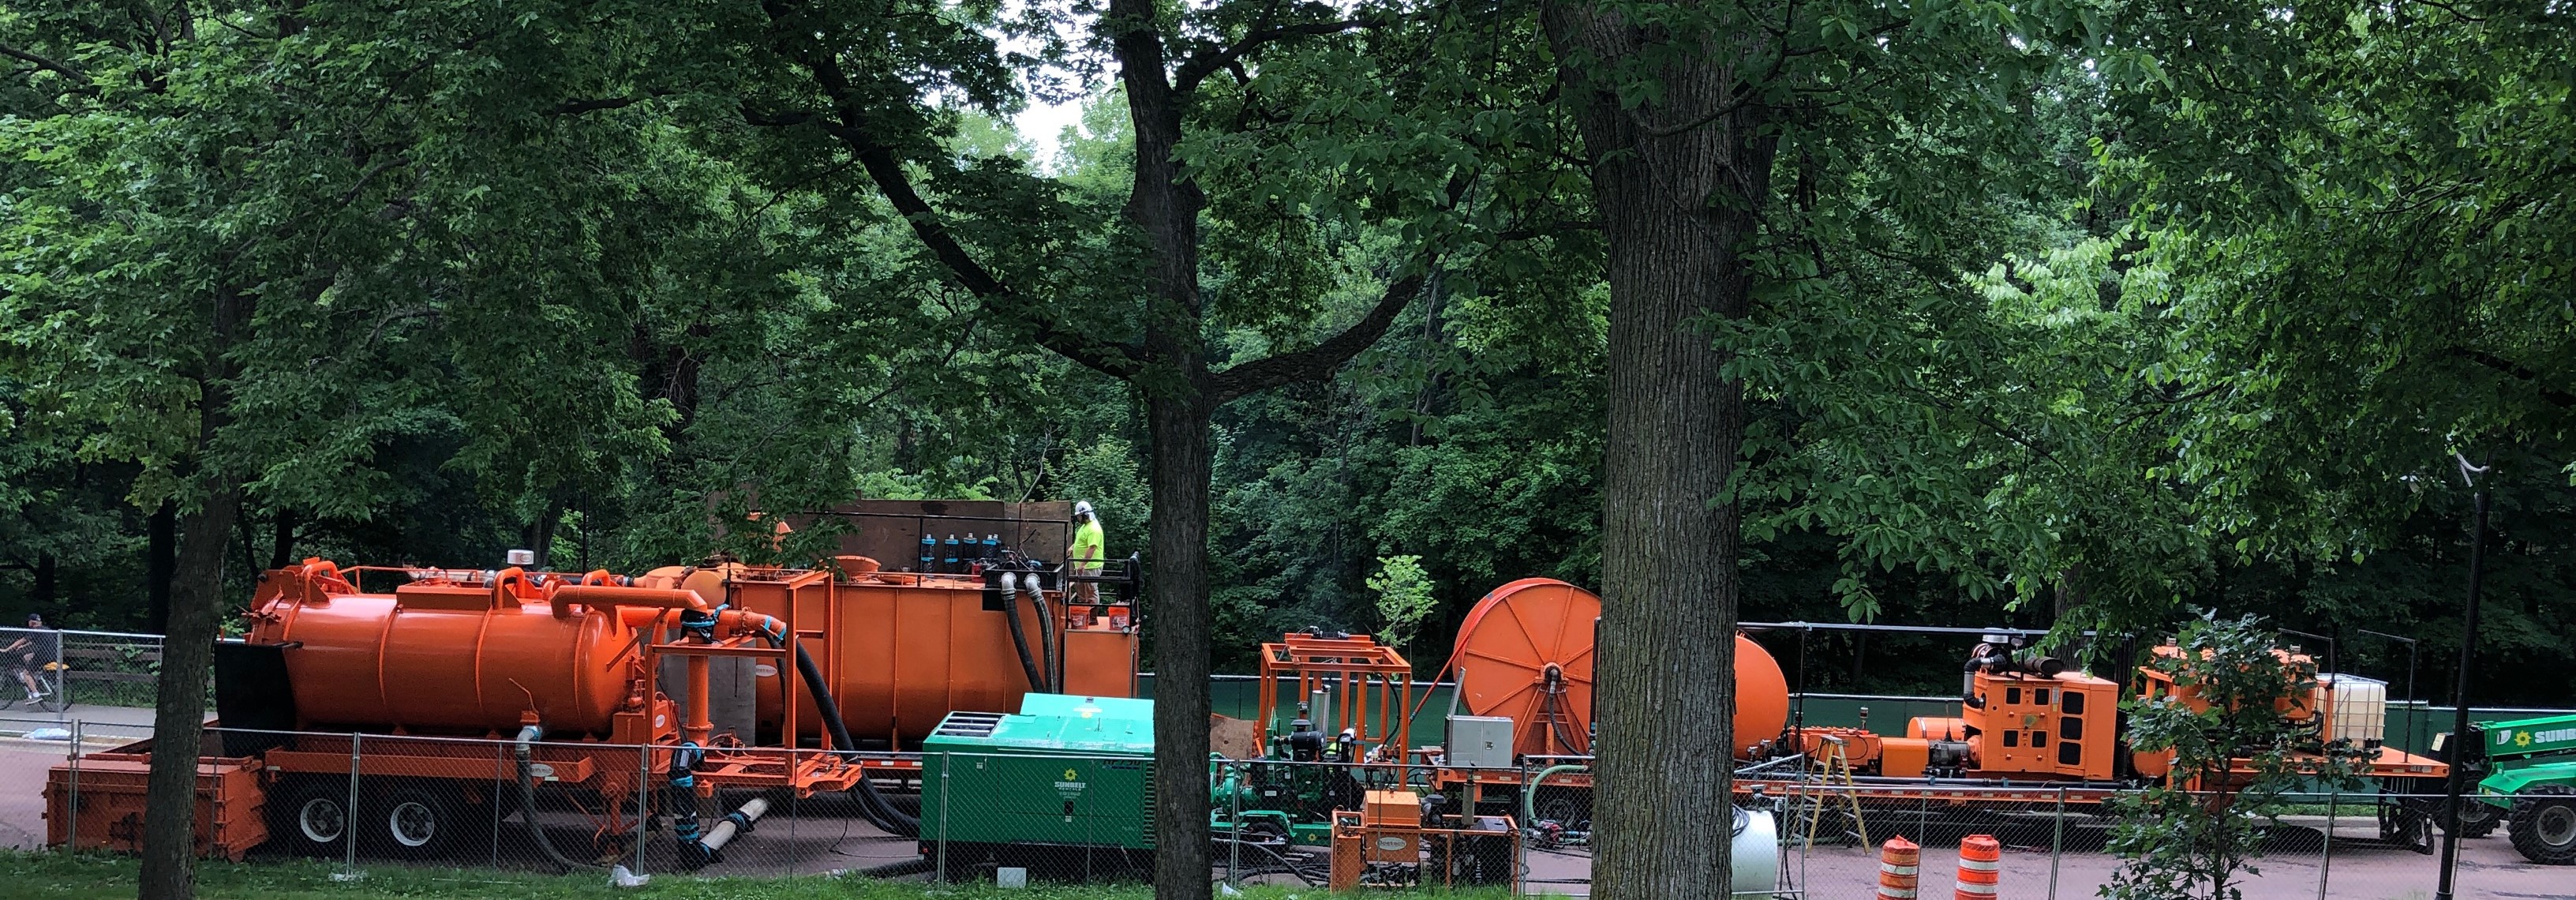 Photo of orange sewer cleaning equipment